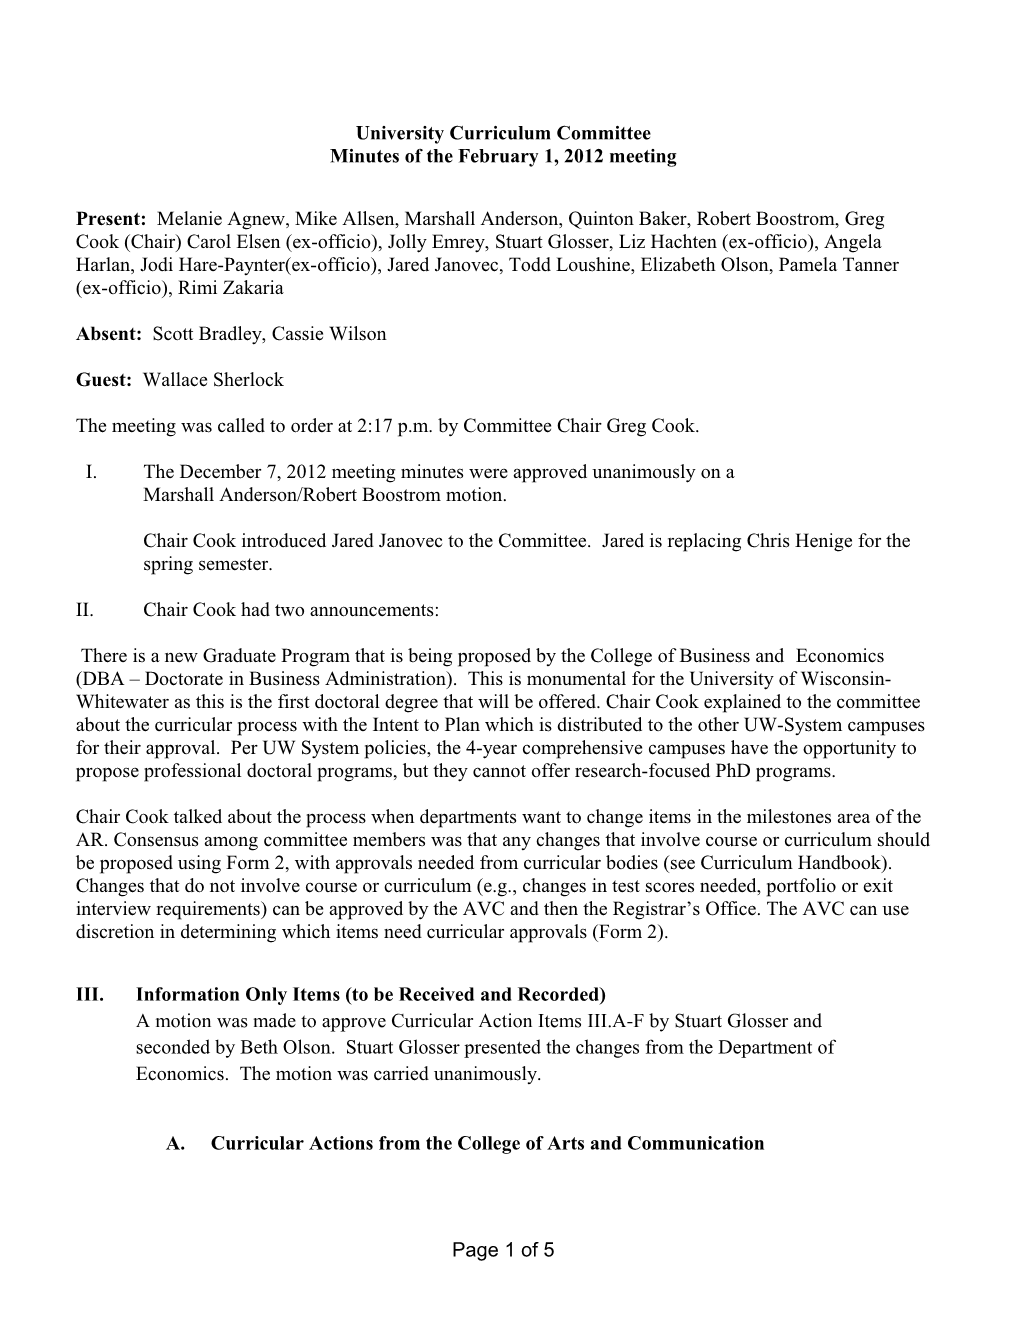 University Curriculum Committee Minutes of the February 1, 2012 Meeting